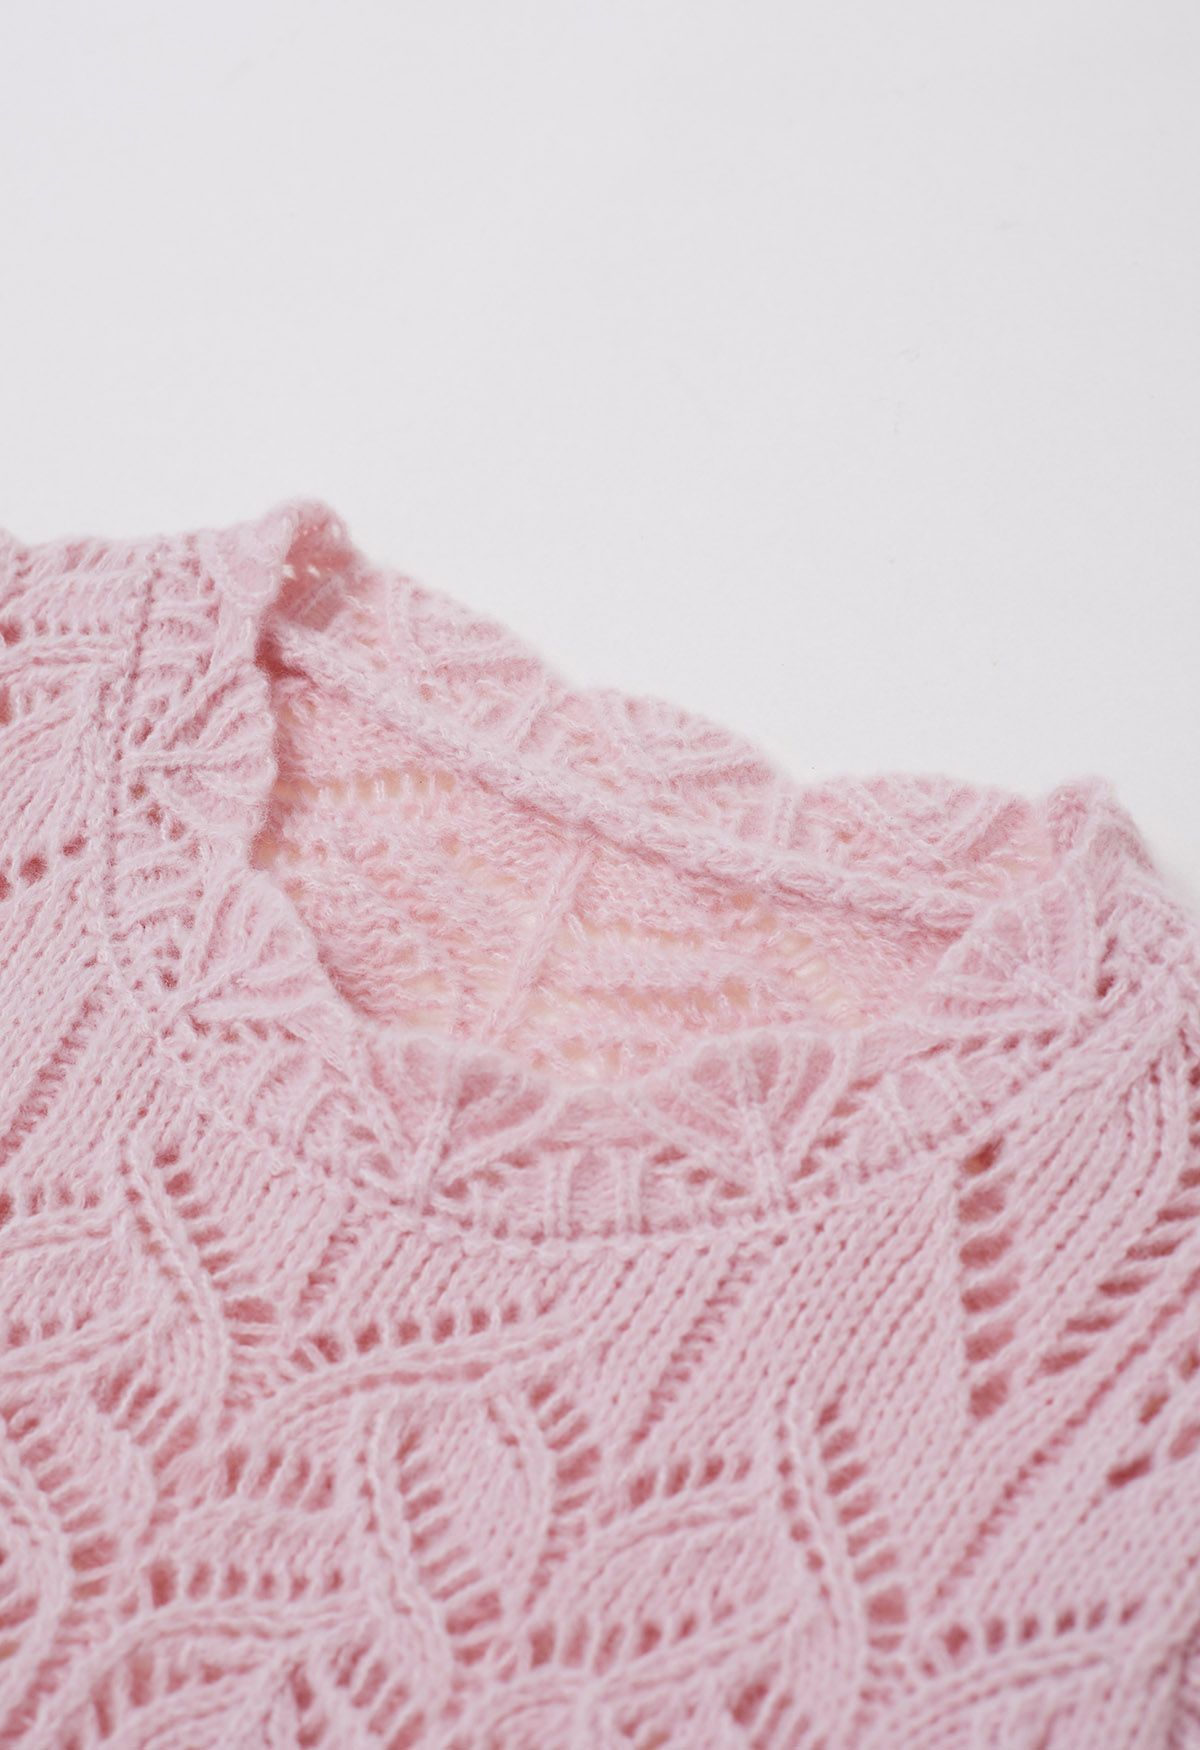 Short-Sleeve Hollow Out Knit Top in Pink